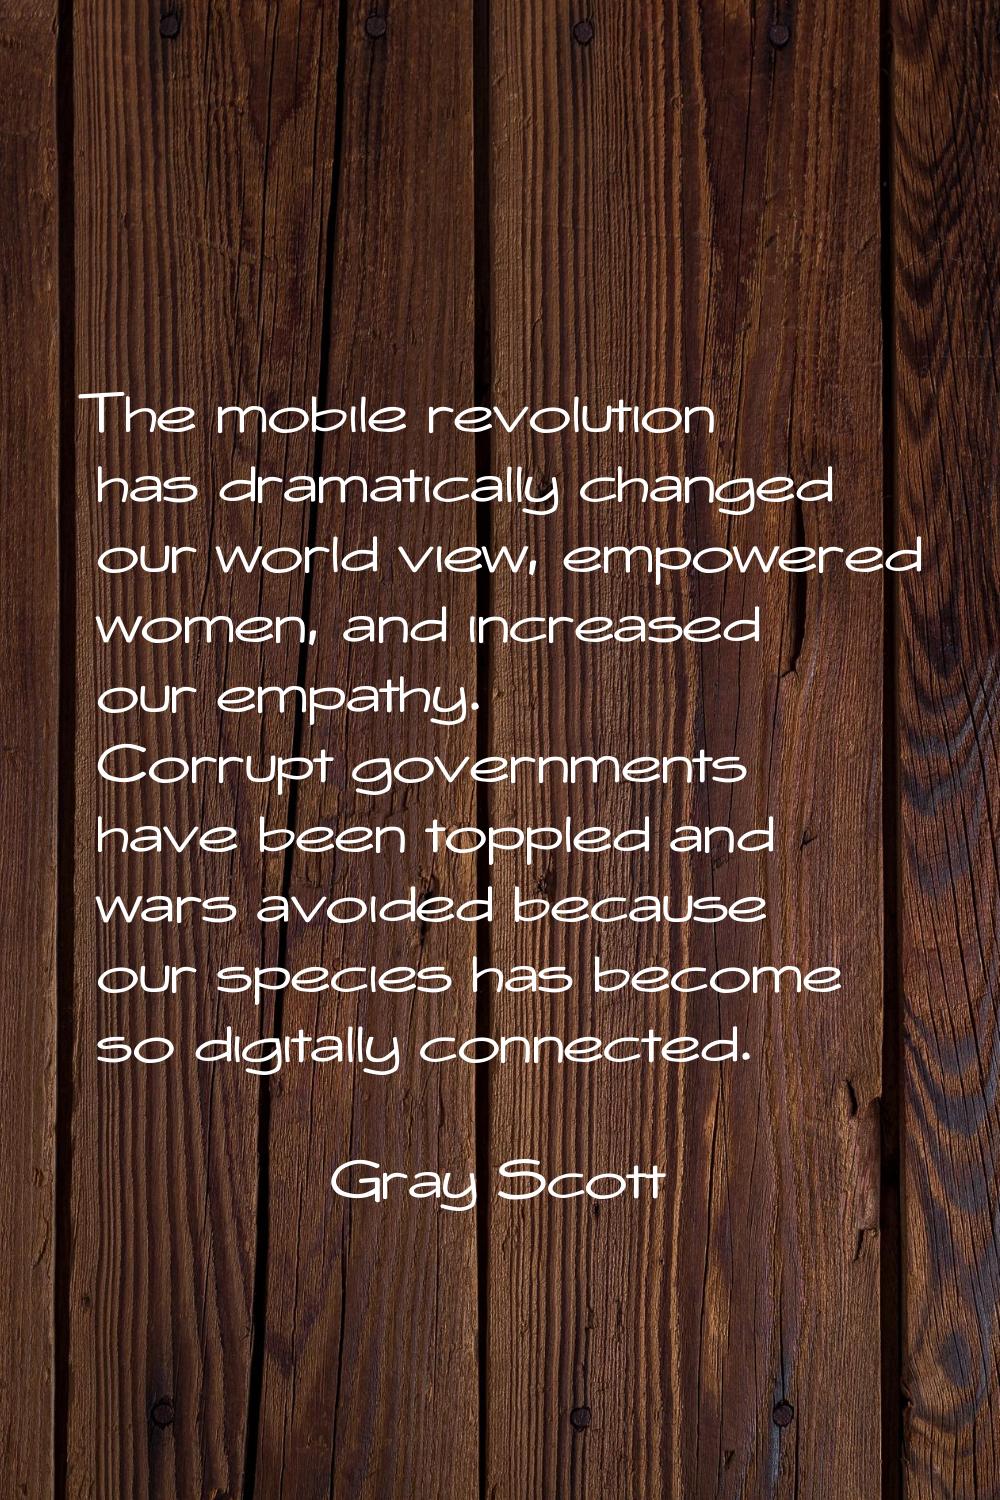 The mobile revolution has dramatically changed our world view, empowered women, and increased our e